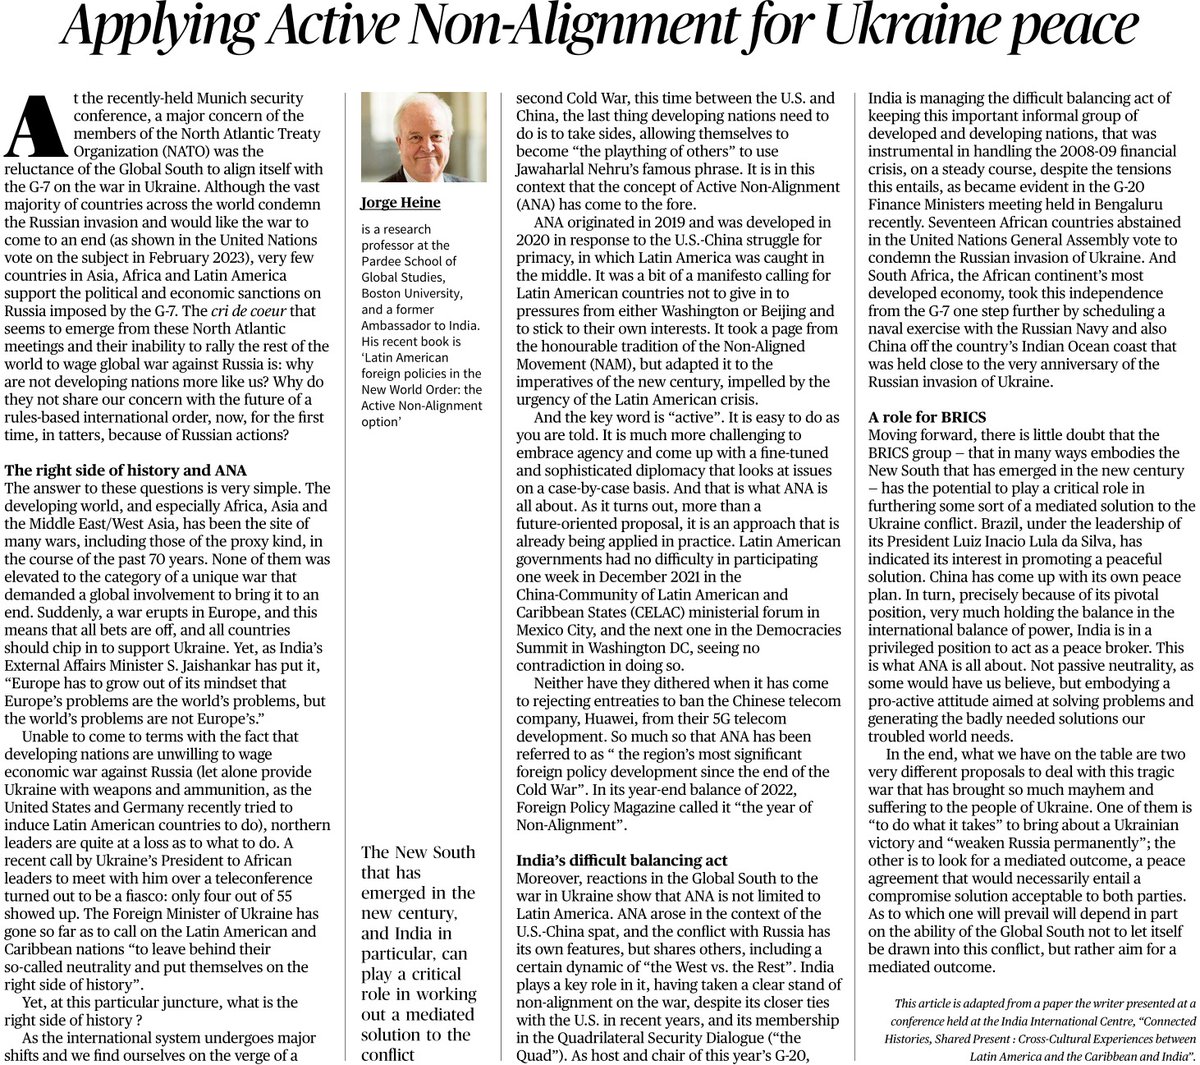 Jorge Heine's recent book talks about the Active Non-Alignment option in an article which featured in @the_hindu  and how can countries apply it without taking sides. #developingcountries #nonalignment